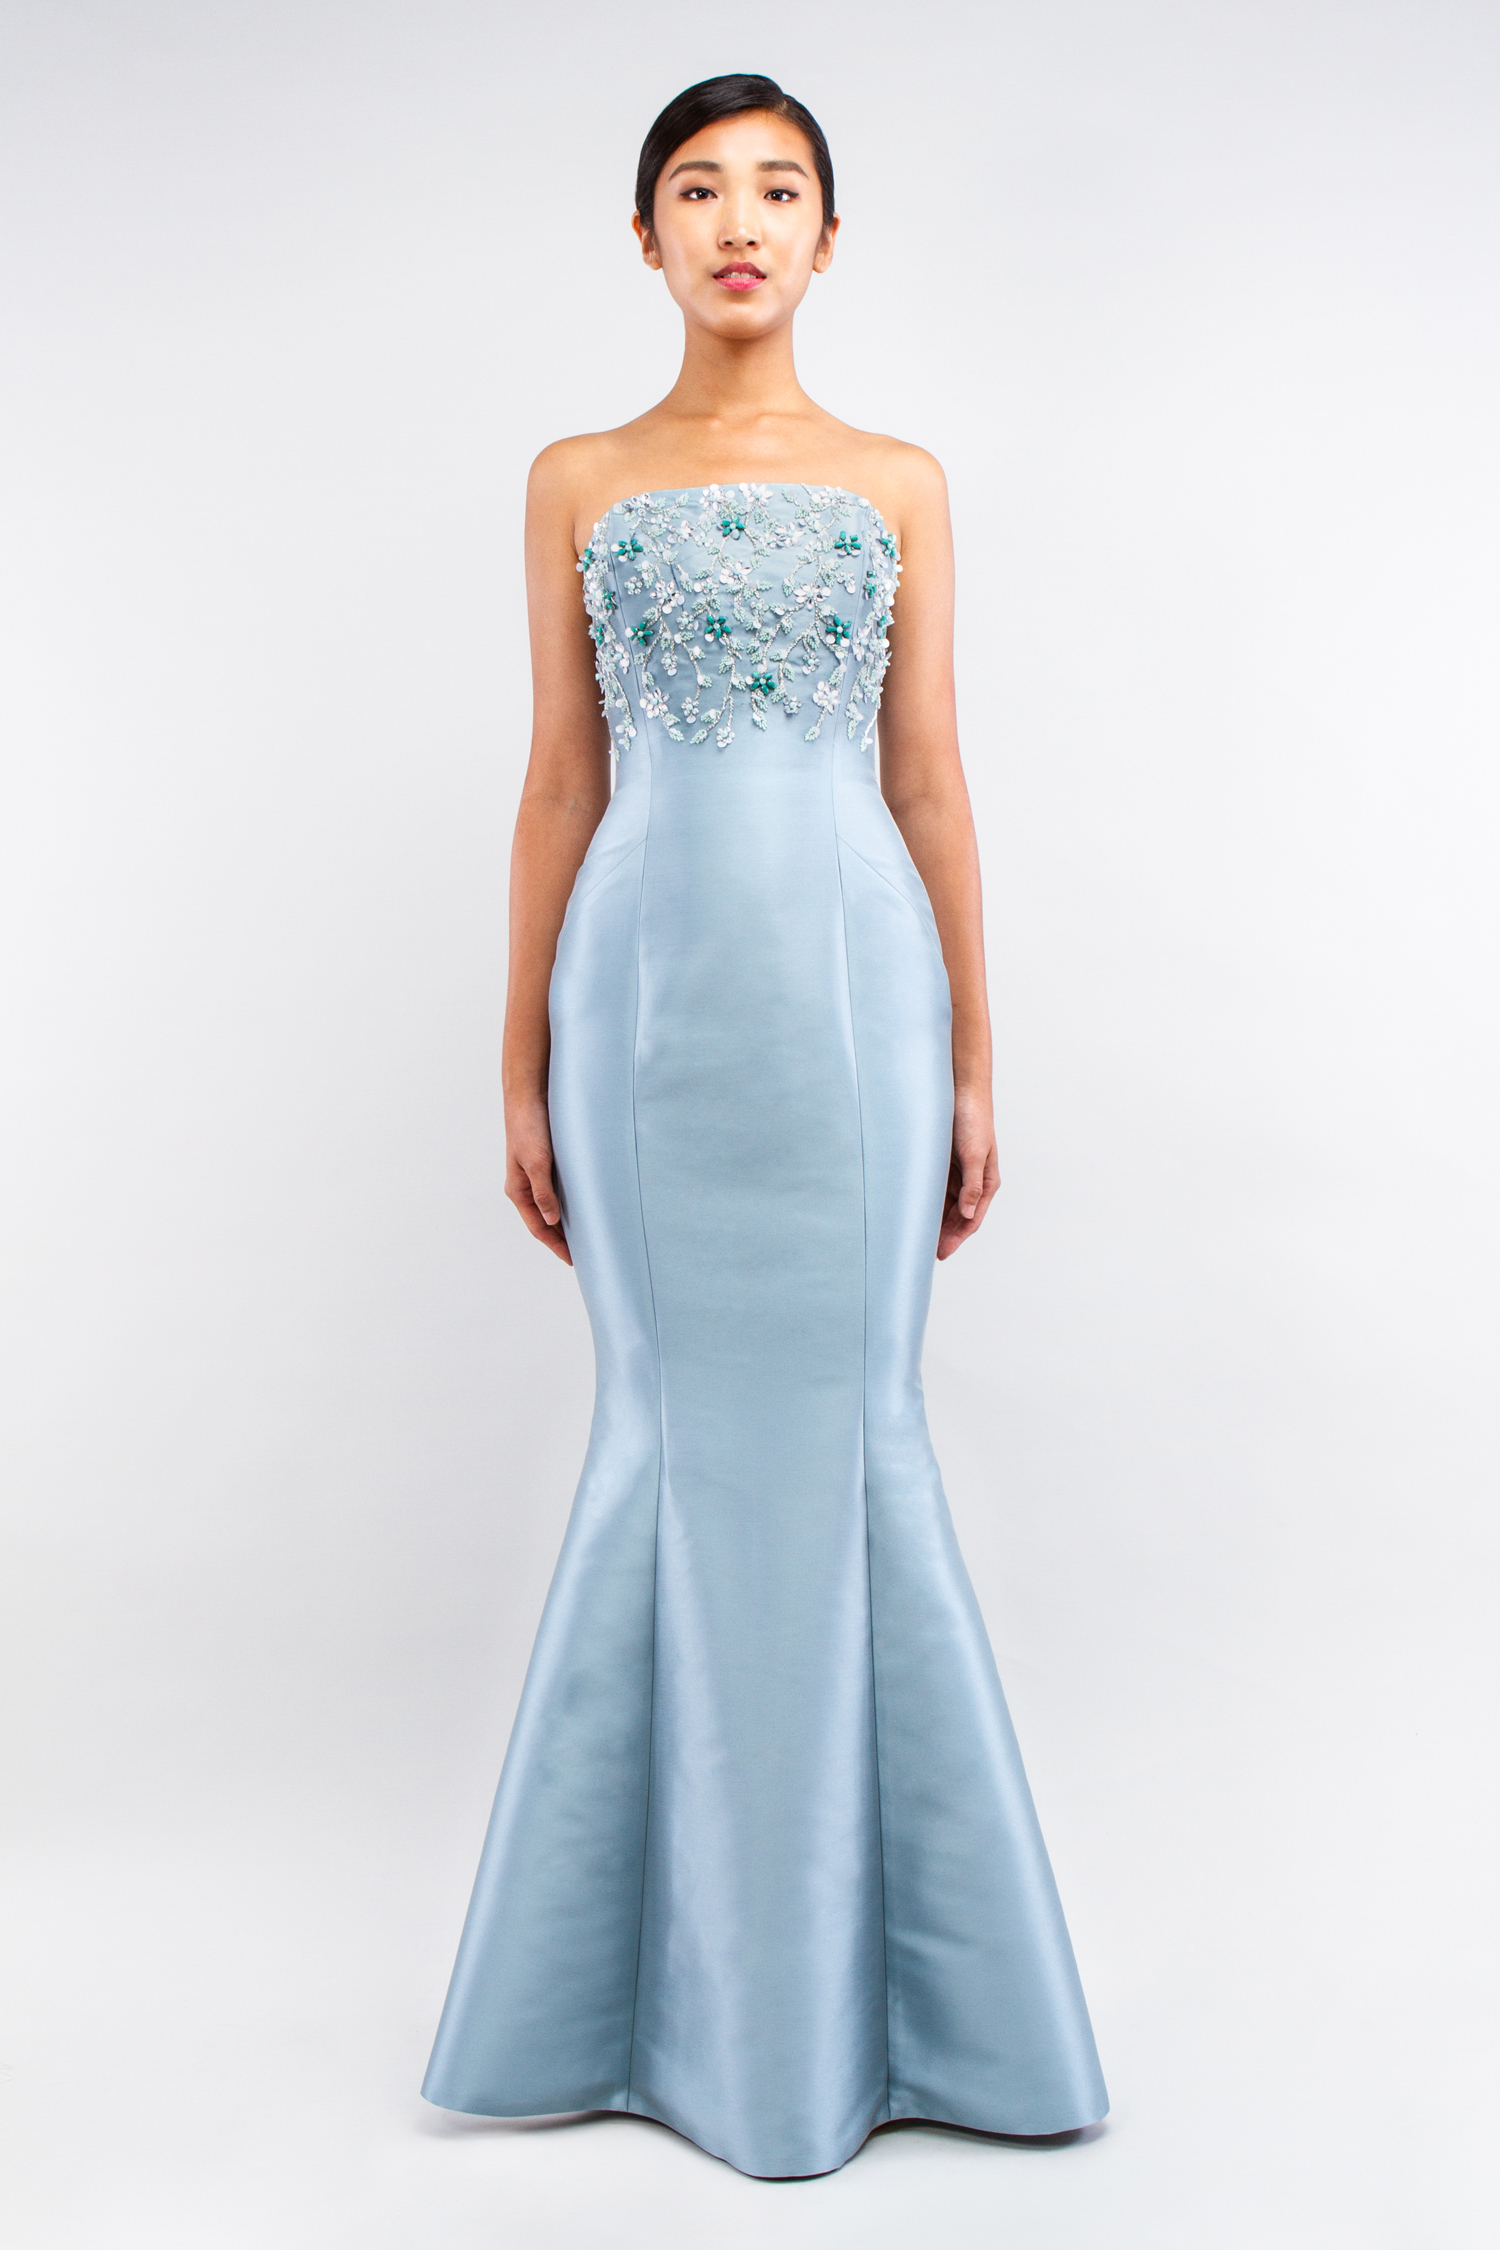 Formal strapless dress for evening event in blue satin and embroidered highlights - Believe Look 5 - Verdin New york